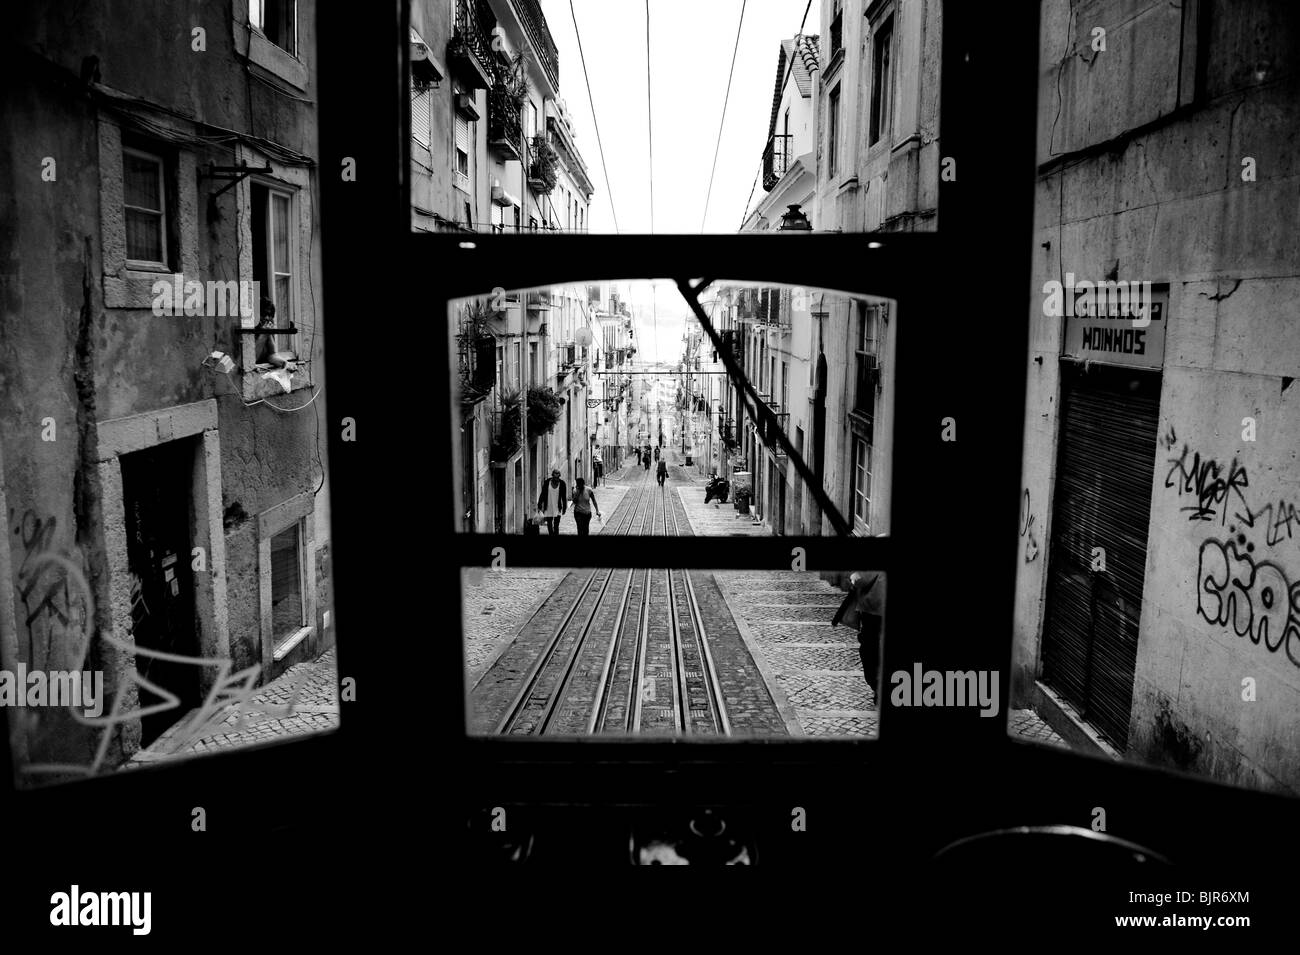 This is an image of a street car driving through the streets of Lisbon, Portugal. Stock Photo